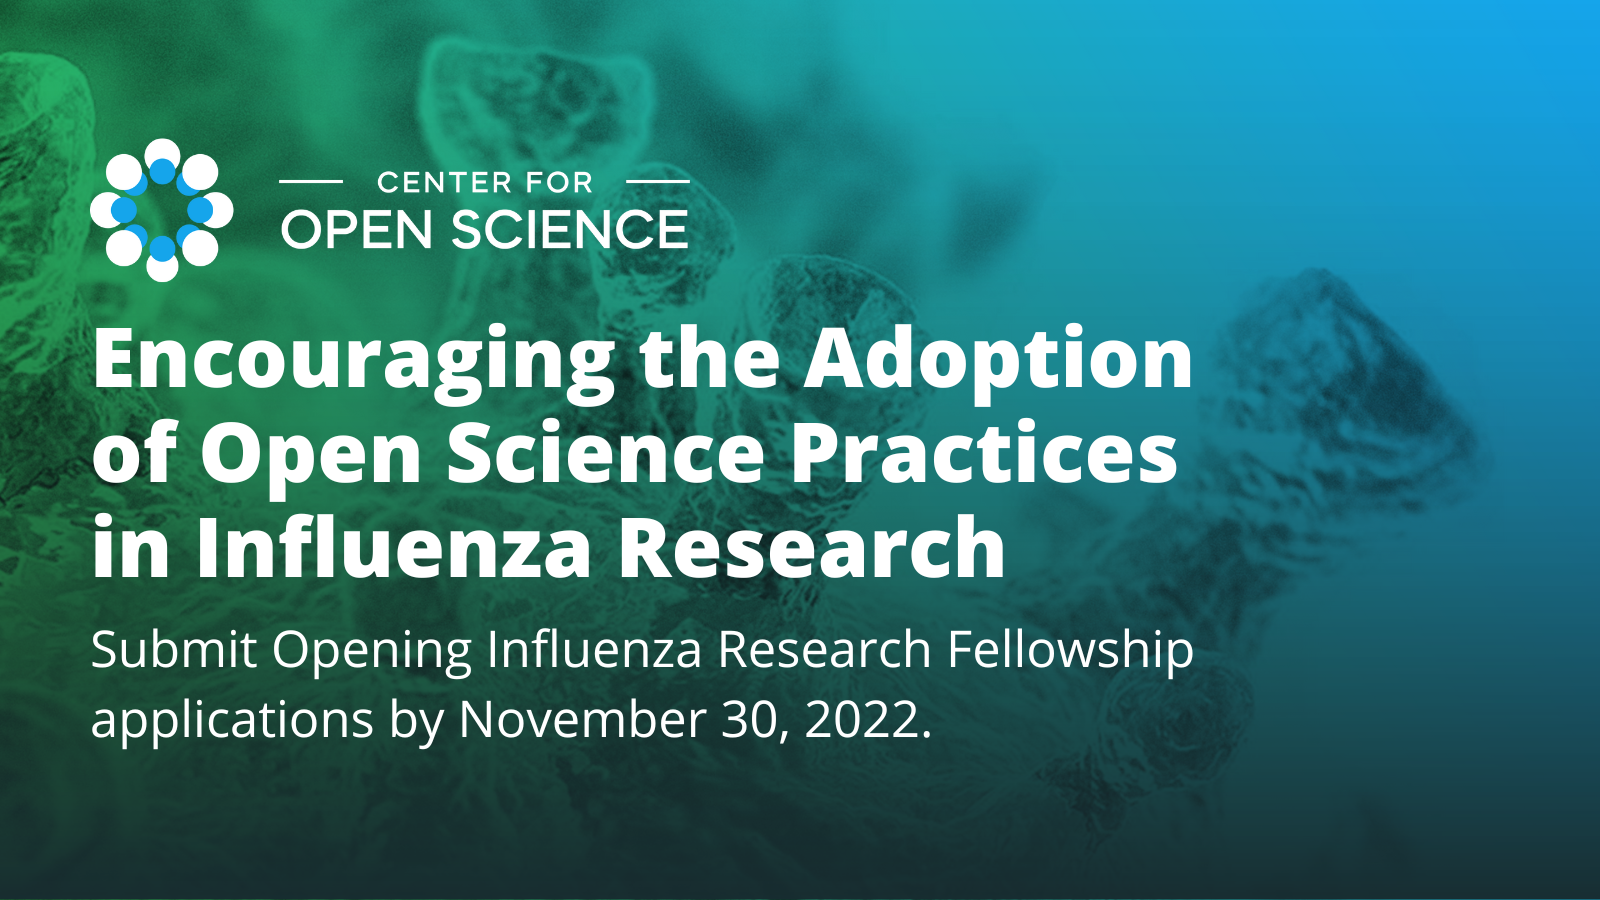 Influenza background with text Encouraging the Adoption of Open Science Practices in Influenza Research